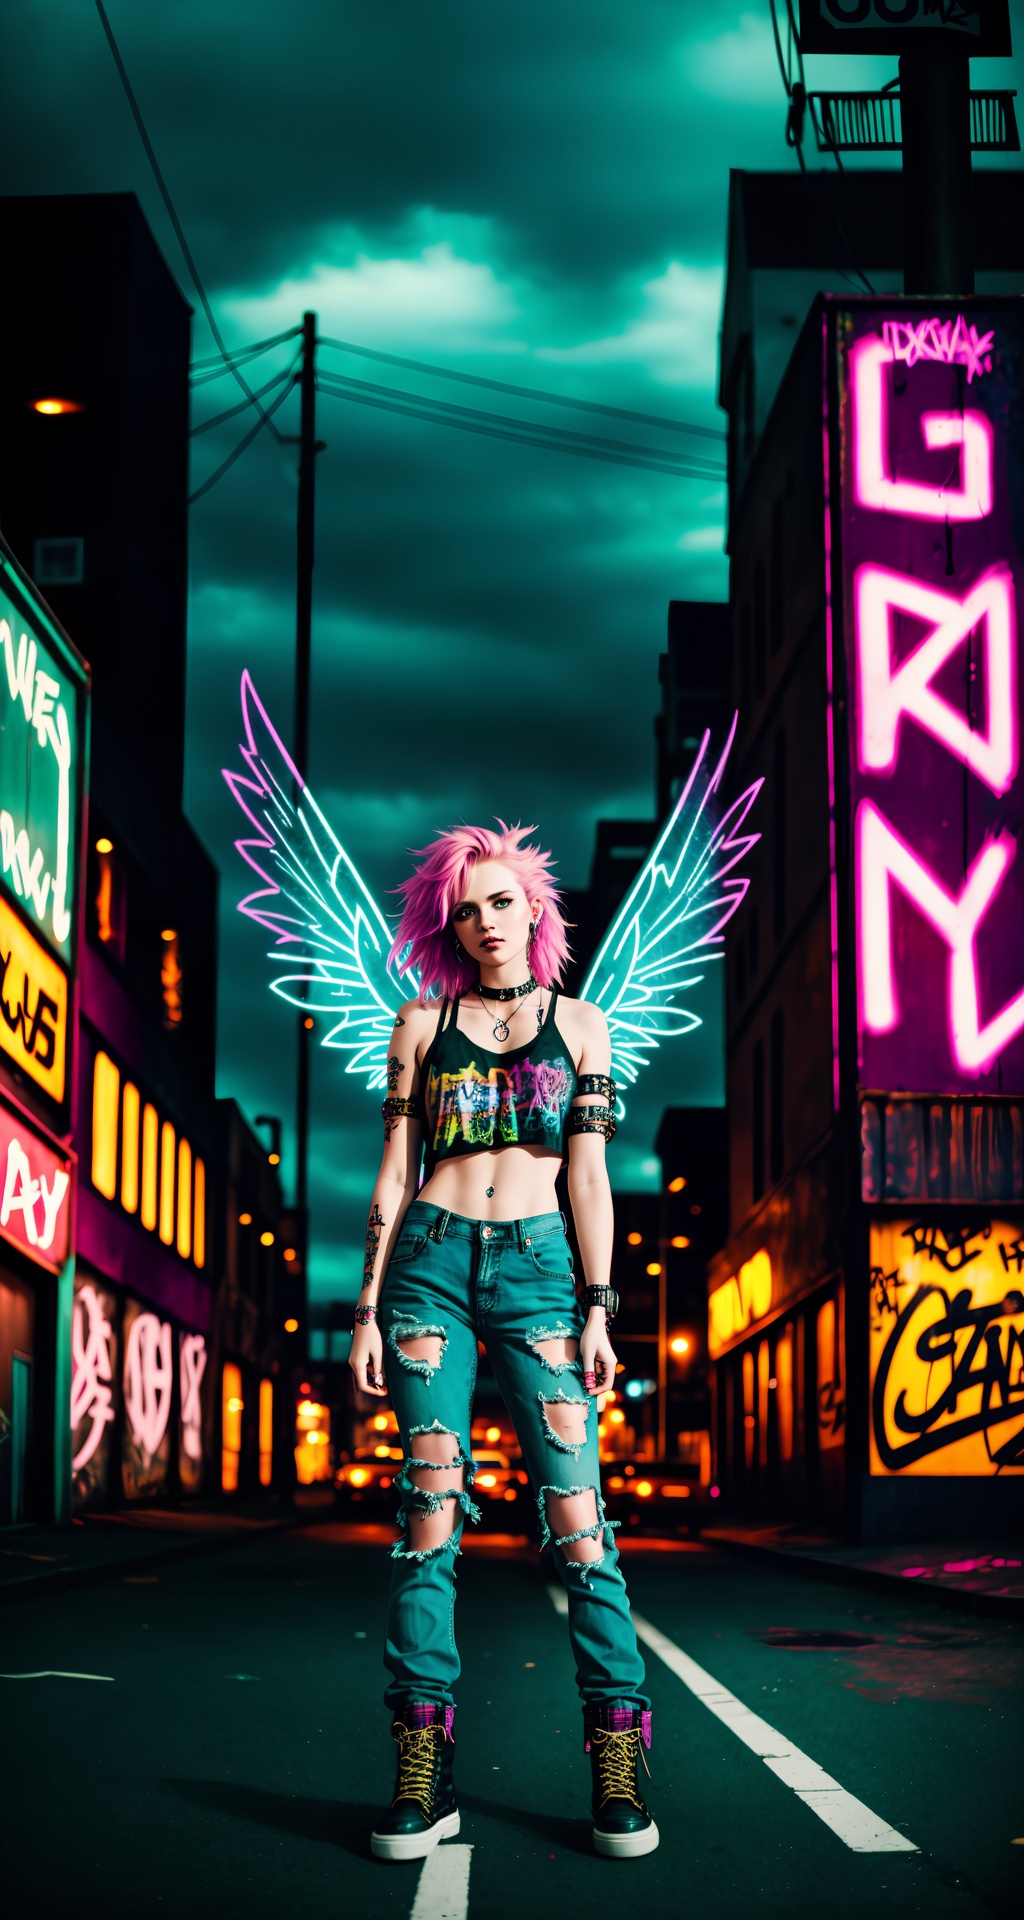 Prompt: 1girl, fairy, grunge fairycore, 90s nostalgia, big wings, wearing ripped jeans, plaid flannel shirt, leather boots, smudged eyeliner, messy hair, choker, piercings, standing against graffiti wall, urban background, neon signs, vintage car, skateboard at her feet, weathered posters, streetlights, moody atmosphere